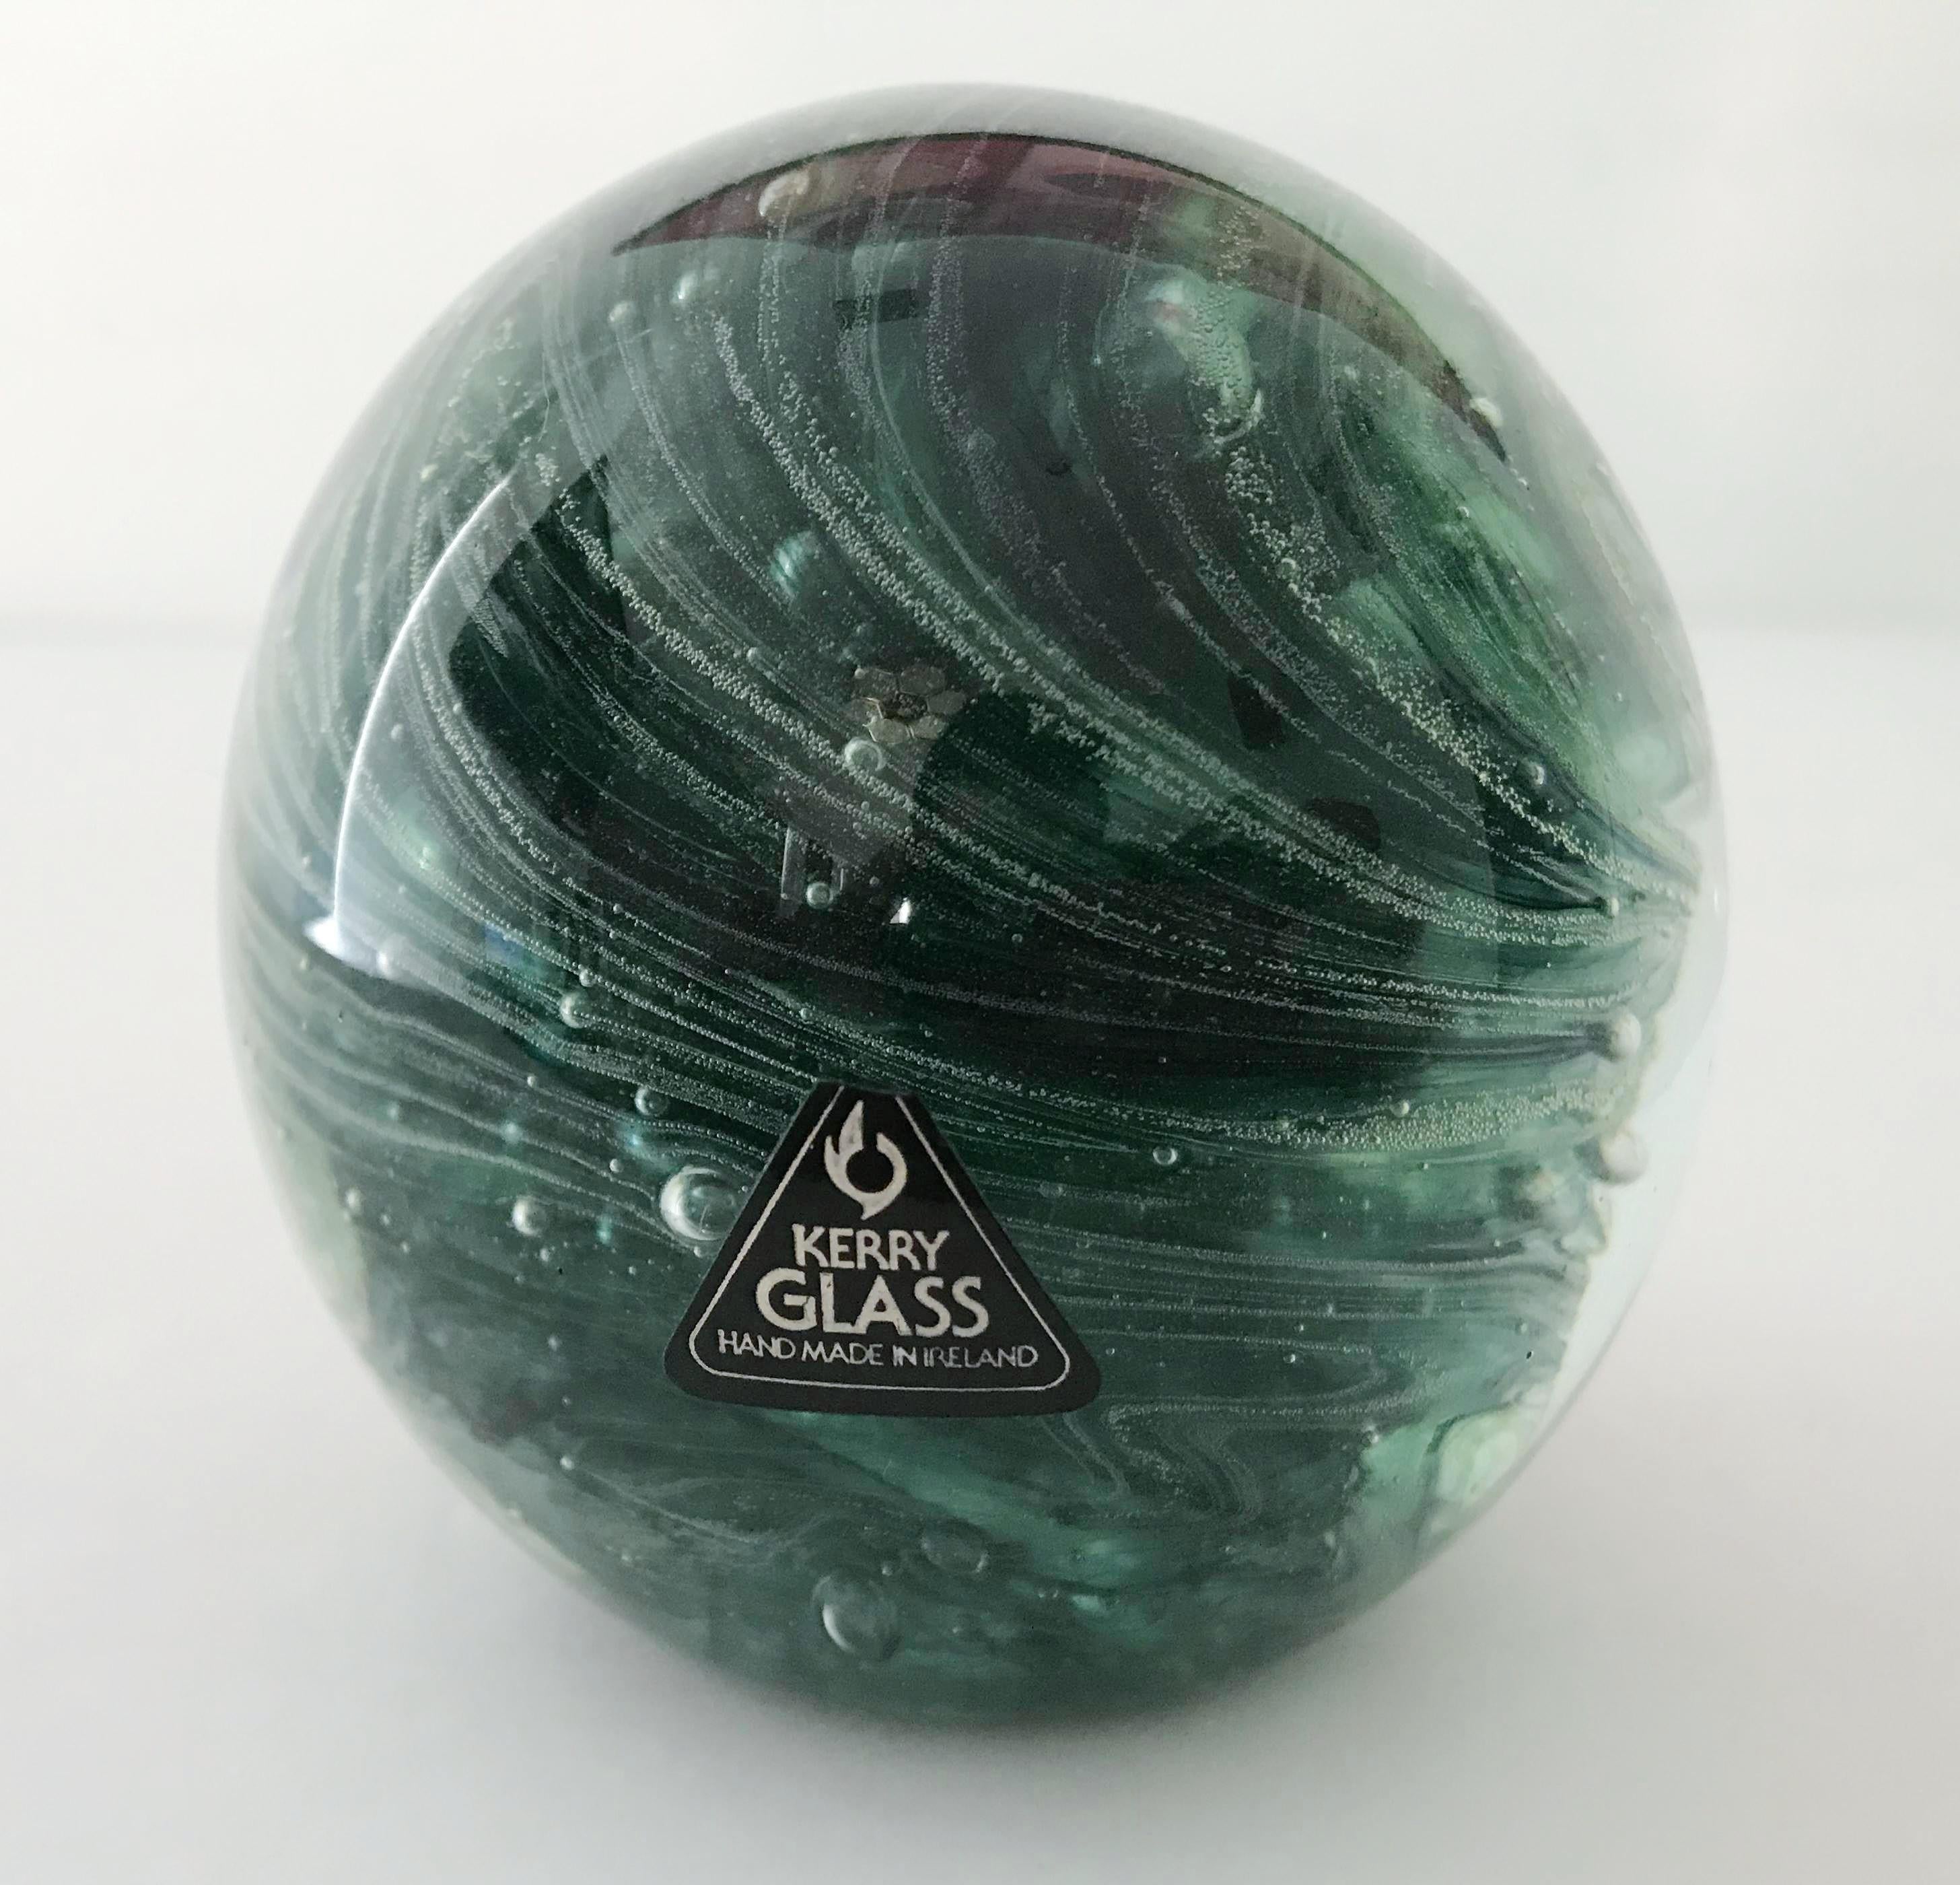 Vintage Kerry glass paperweight hand blown in dark green color with small bubbles / Made in Ireland, circa 1980s
Original stickers on the glass and base
Measures: diameter 3 inches, height 3 inches
1 in stock in Palm Springs ON 50% OFF SALE for $199